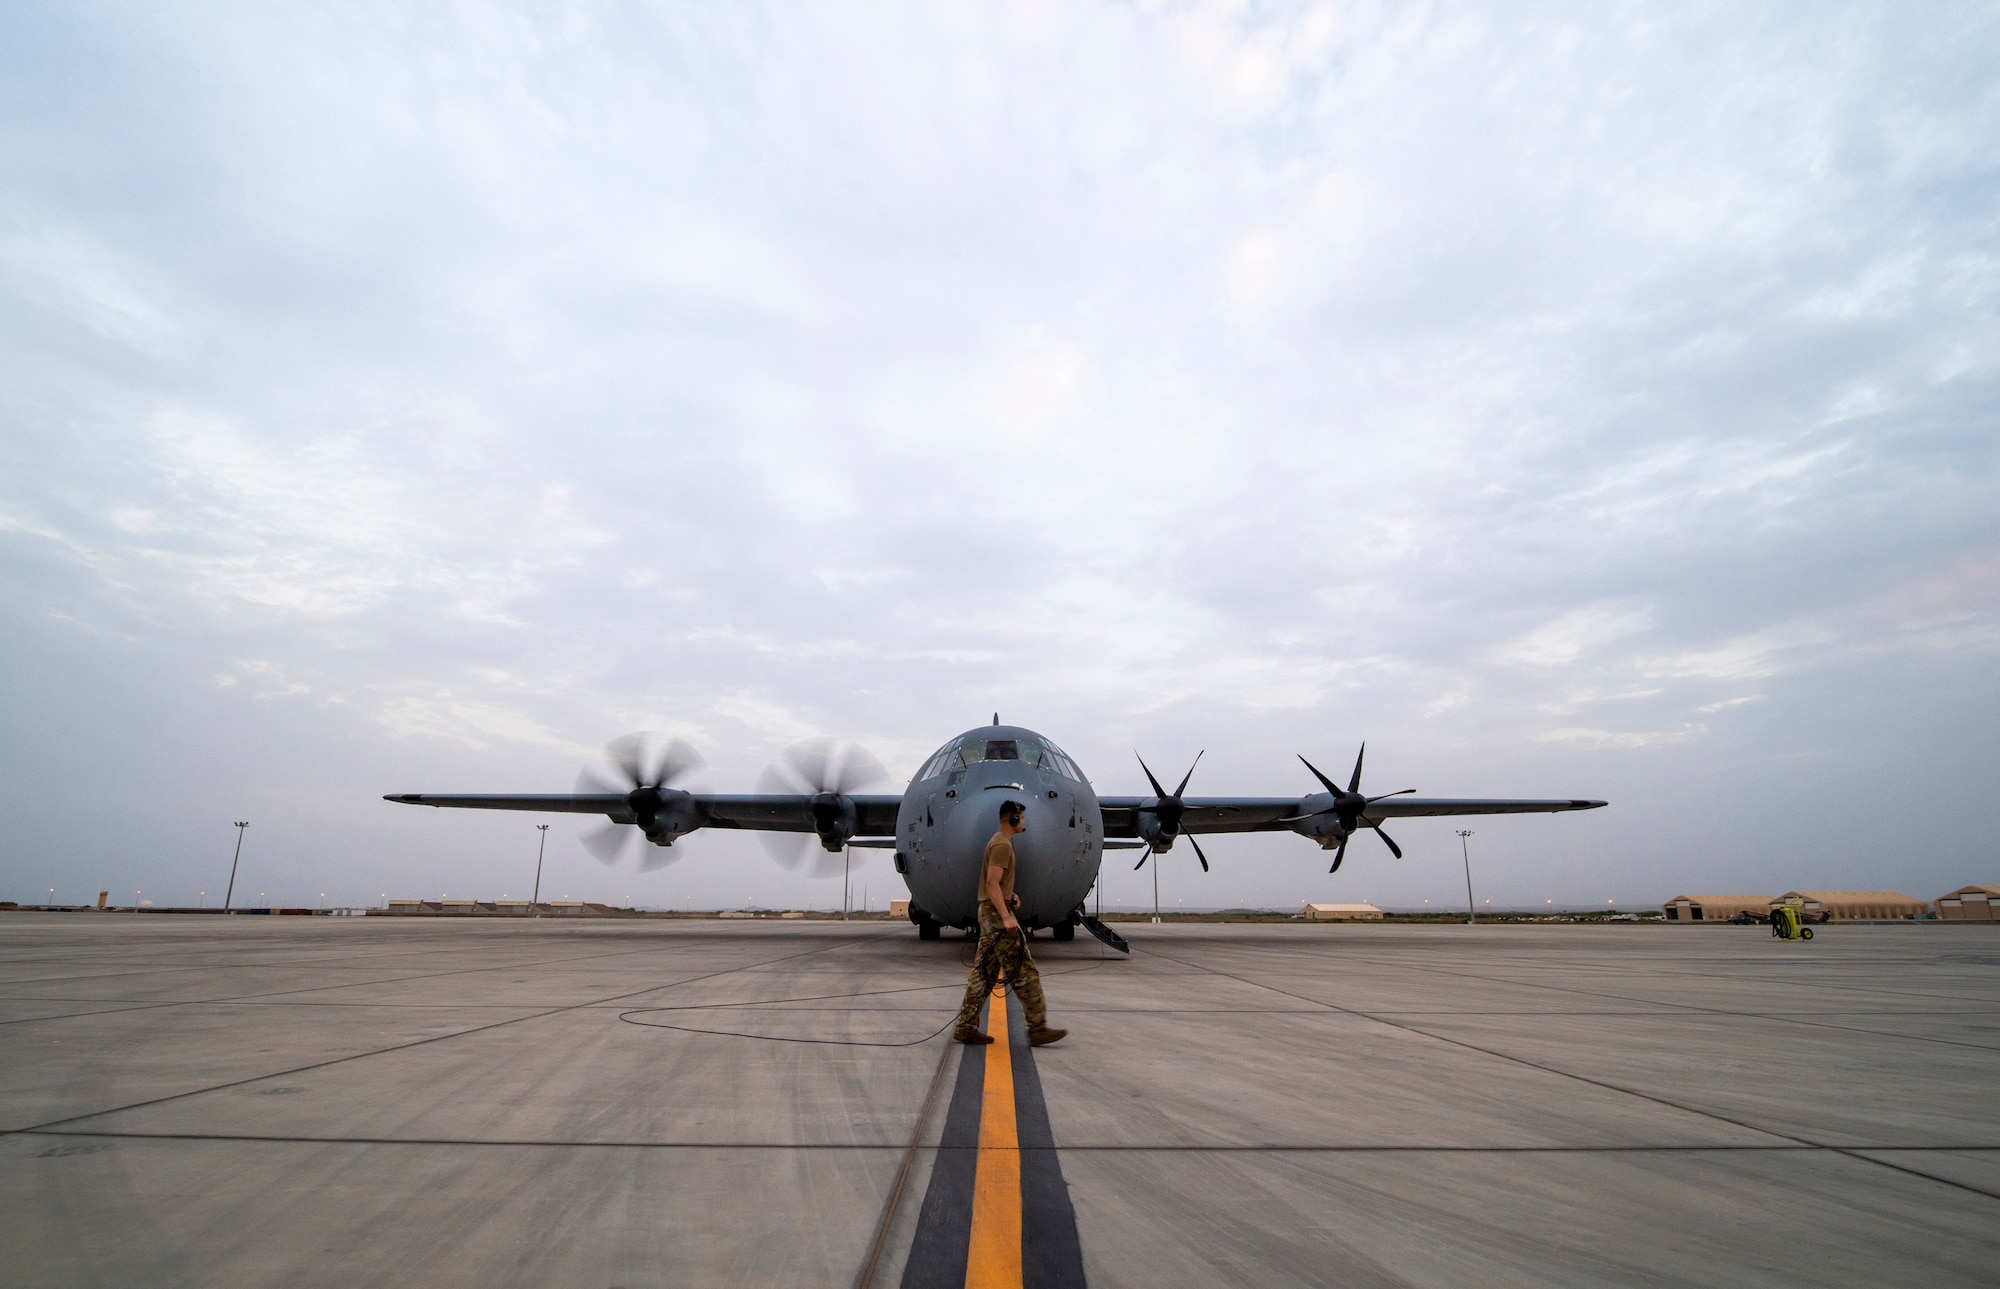 A U.S. Air Force 75th Expeditionary Airlift Squadron (EAS) loadmaster ensures engine start of a C-130J Super Hercules at Camp Lemonnier, Djibouti, June 28, 2020. The 75th EAS provides strategic airlift capabilities across the Combined Joint Task Force - Horn of Africa (CJTF-HOA) area of responsibility. (U.S. Air Force photo by Tech. Sgt. Christopher Ruano)